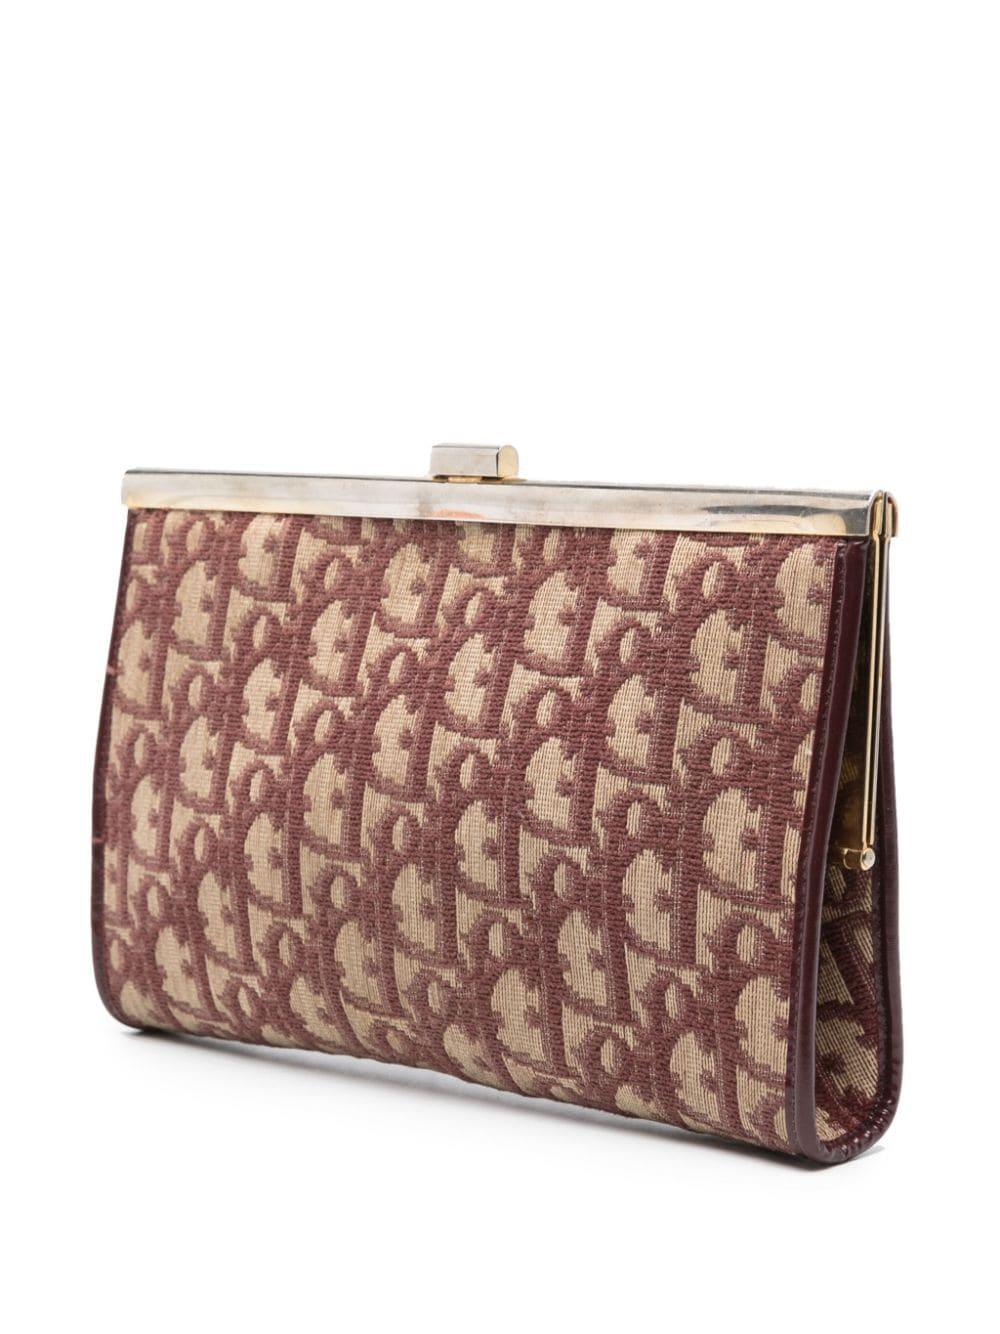 Christian Dior bordeaux Oblique clutch bag featuring  a canvas monogram Oblique logo, a top metallic claps opening, an inside bordeaux leather lining, an inside gold tone logo stamp. 
Circa: 1970s
Length 8.6in. (22 cm)
Height 5.1in. (13cm)
Depth